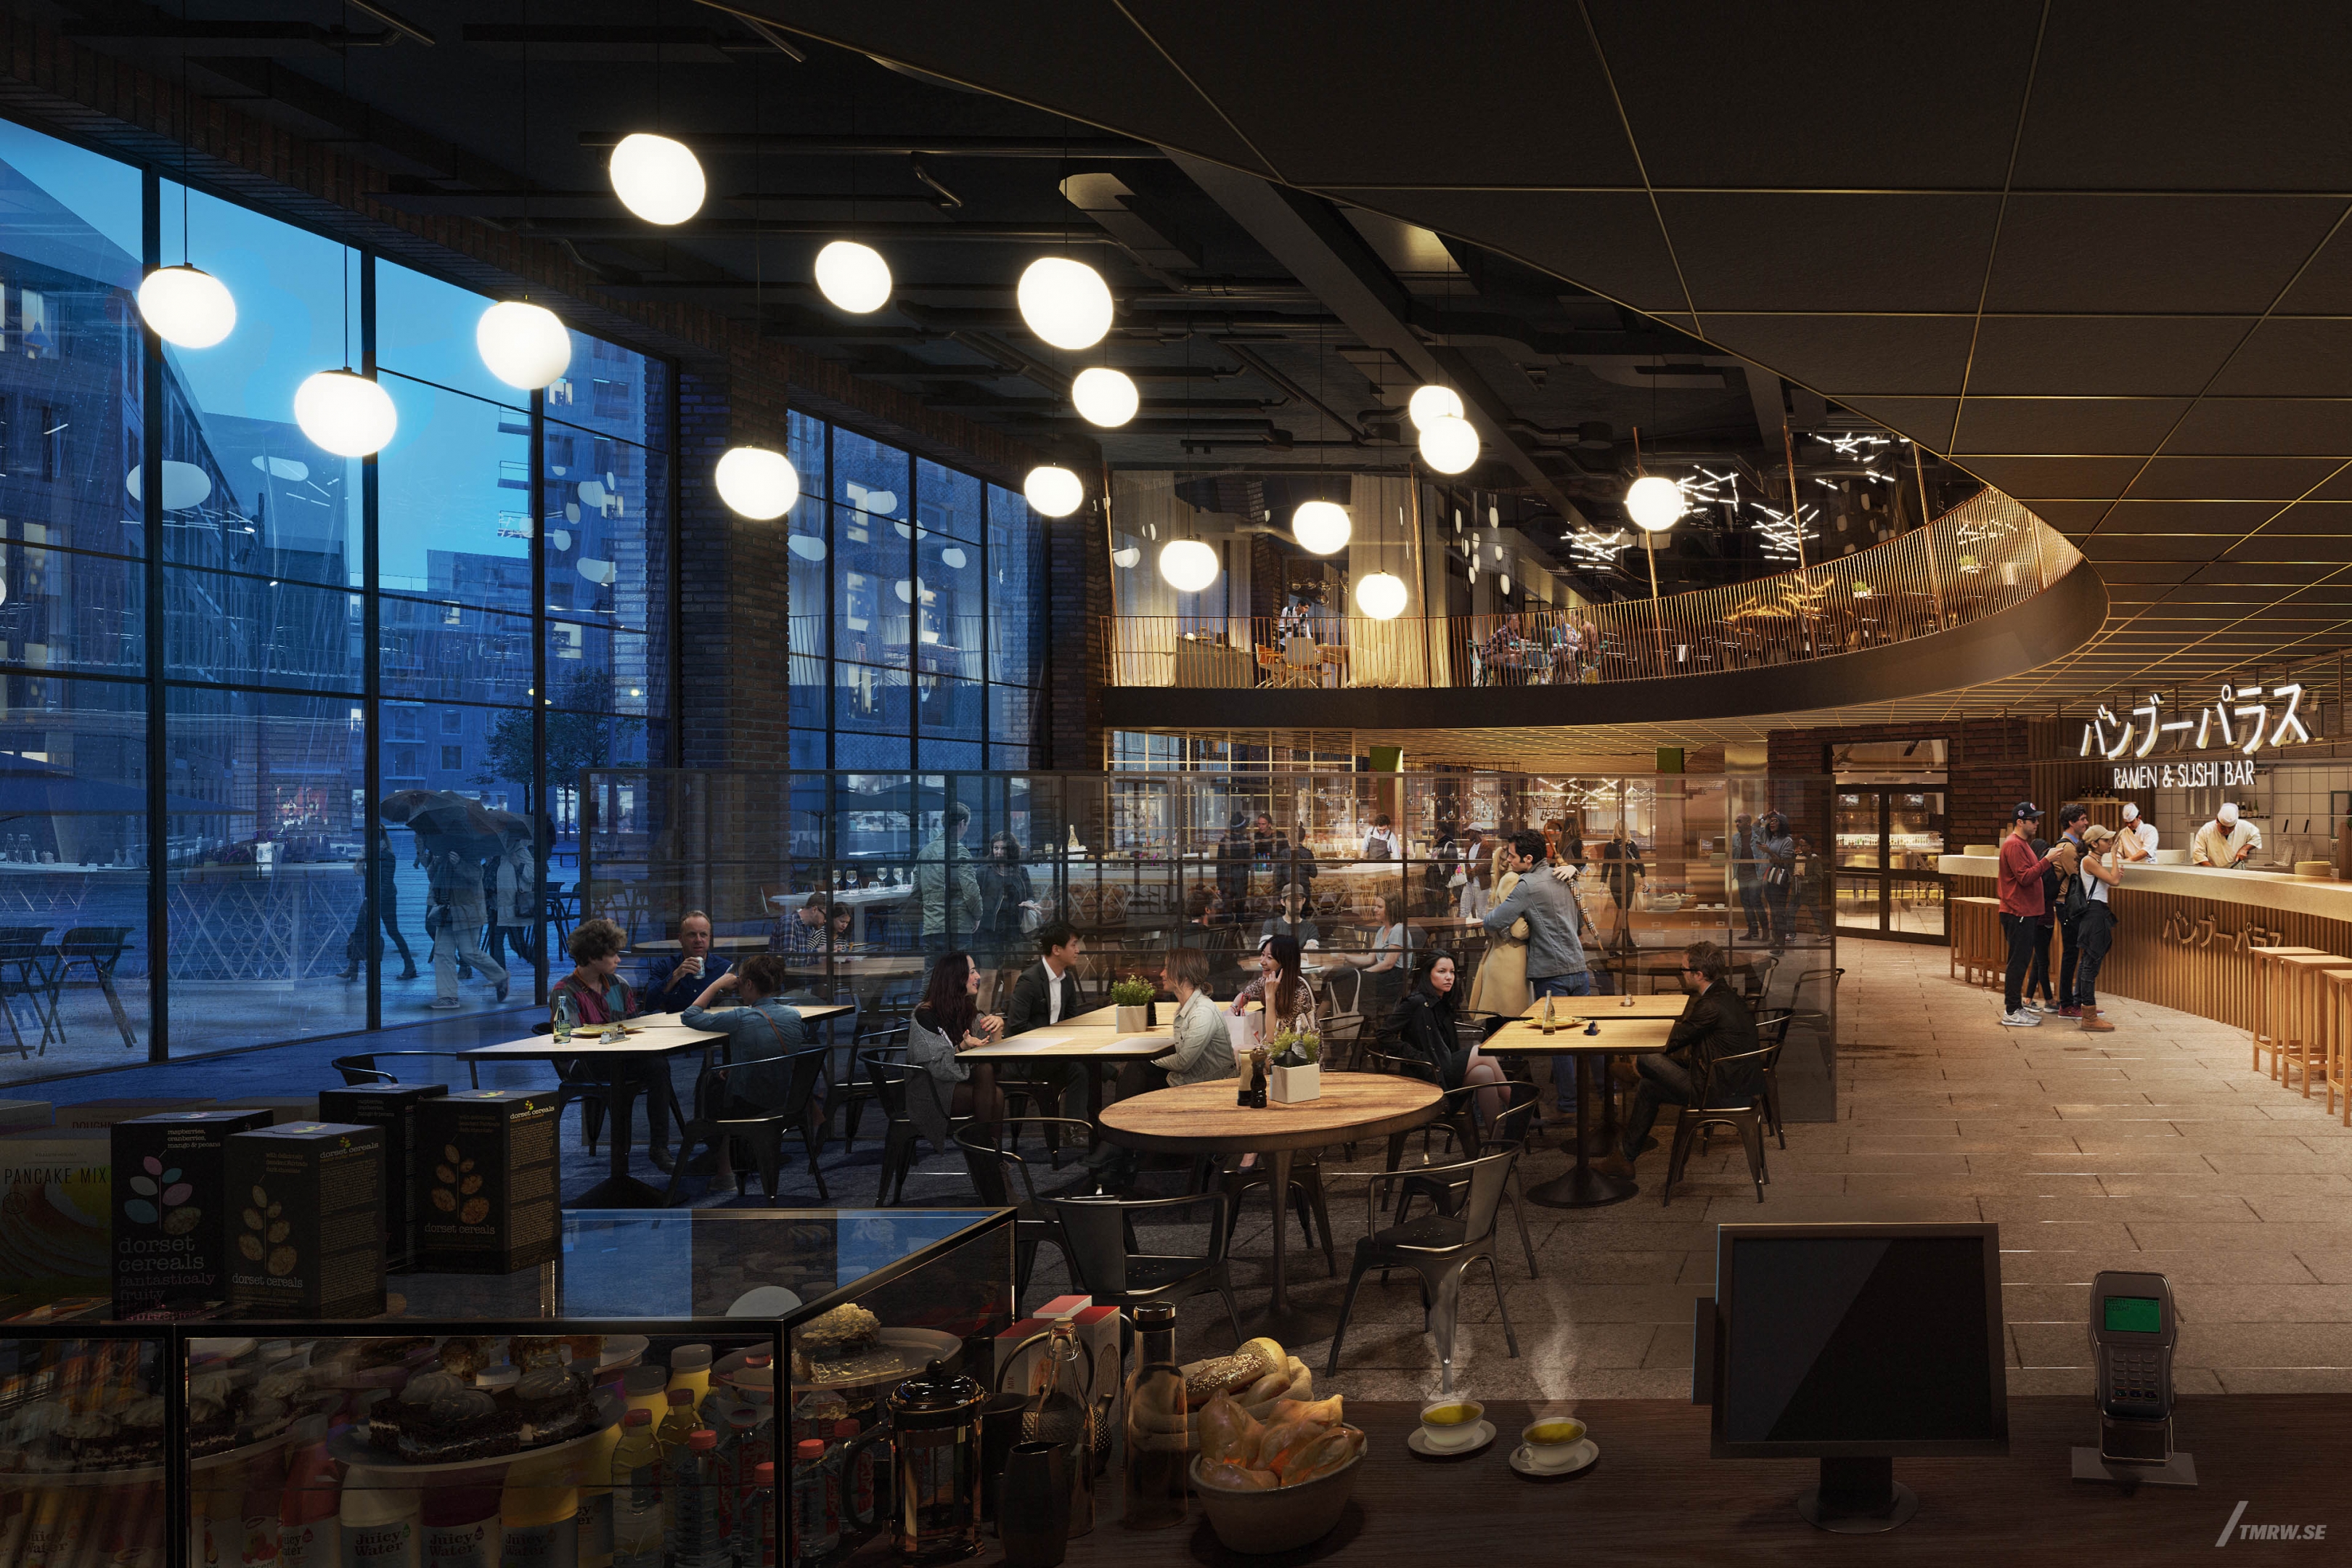 Architectural visualization of Hotell Västerport for Fredblads, interior of hotel restaurant, dusk outside